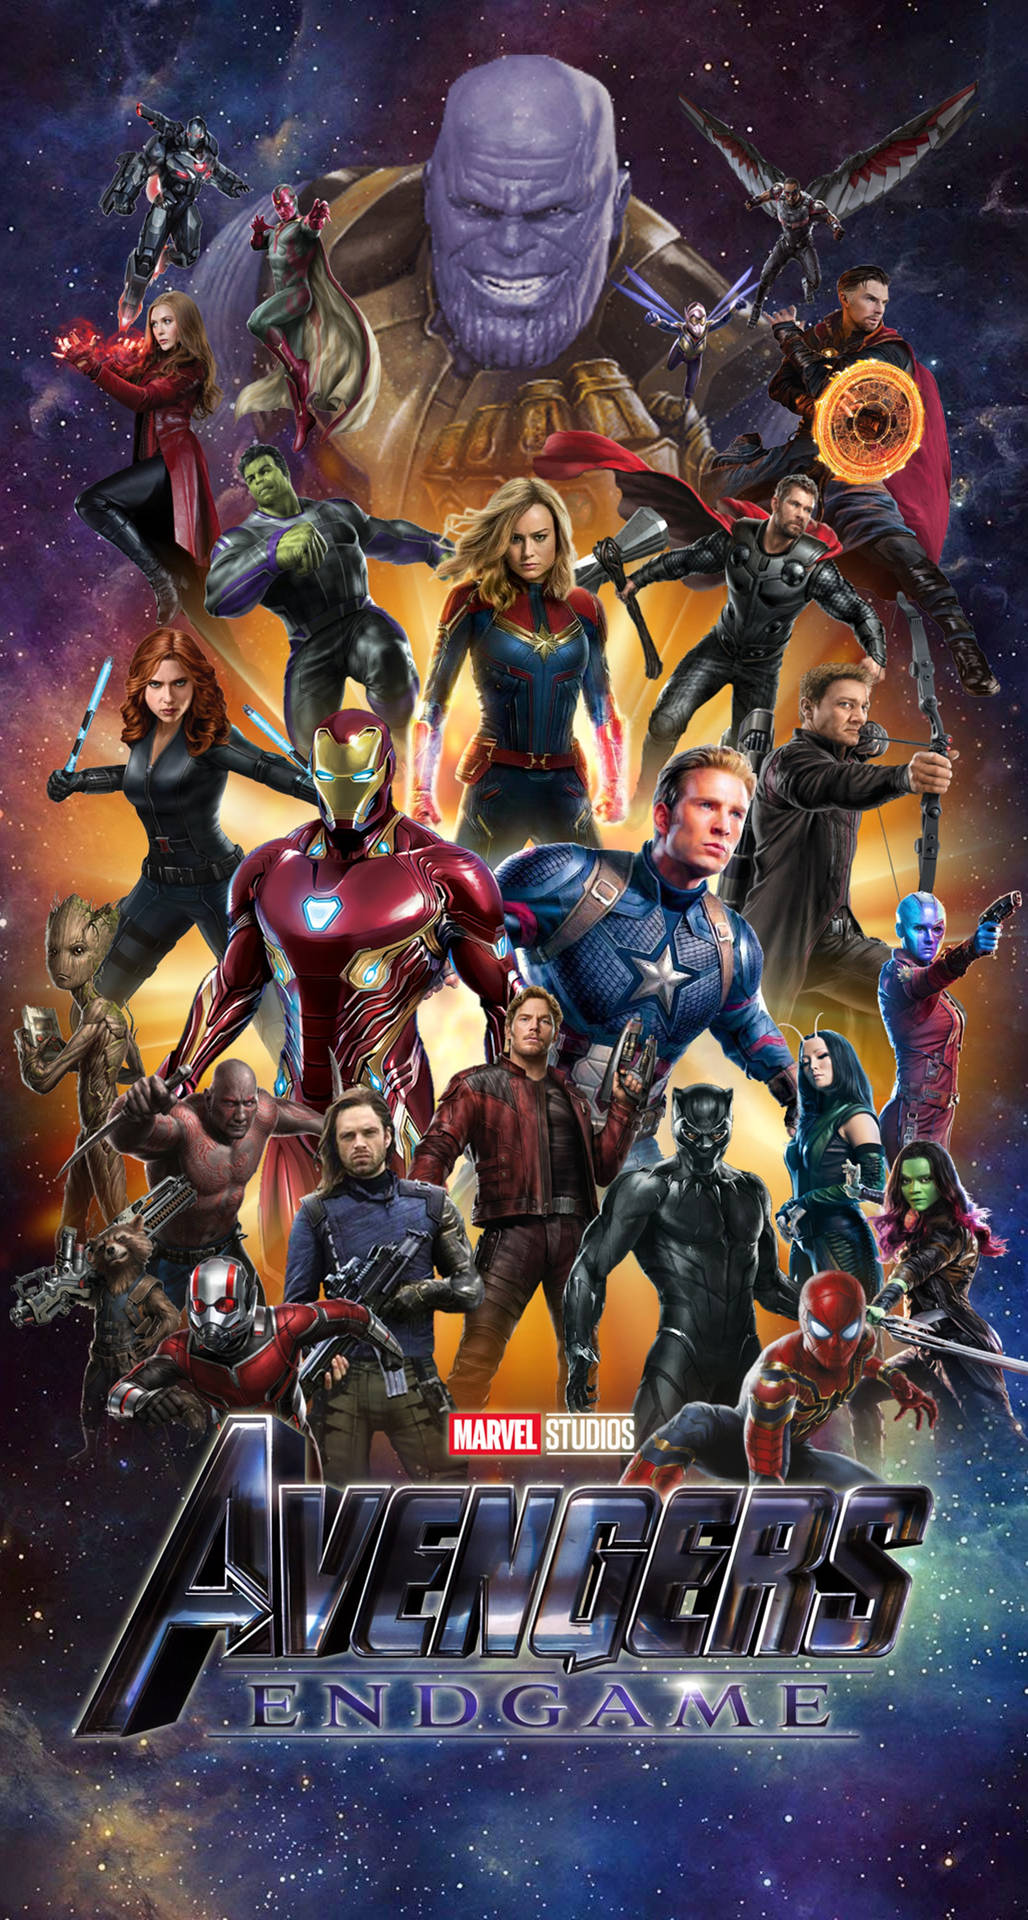 Avengers Endgame Poster With Many Characters Wallpaper